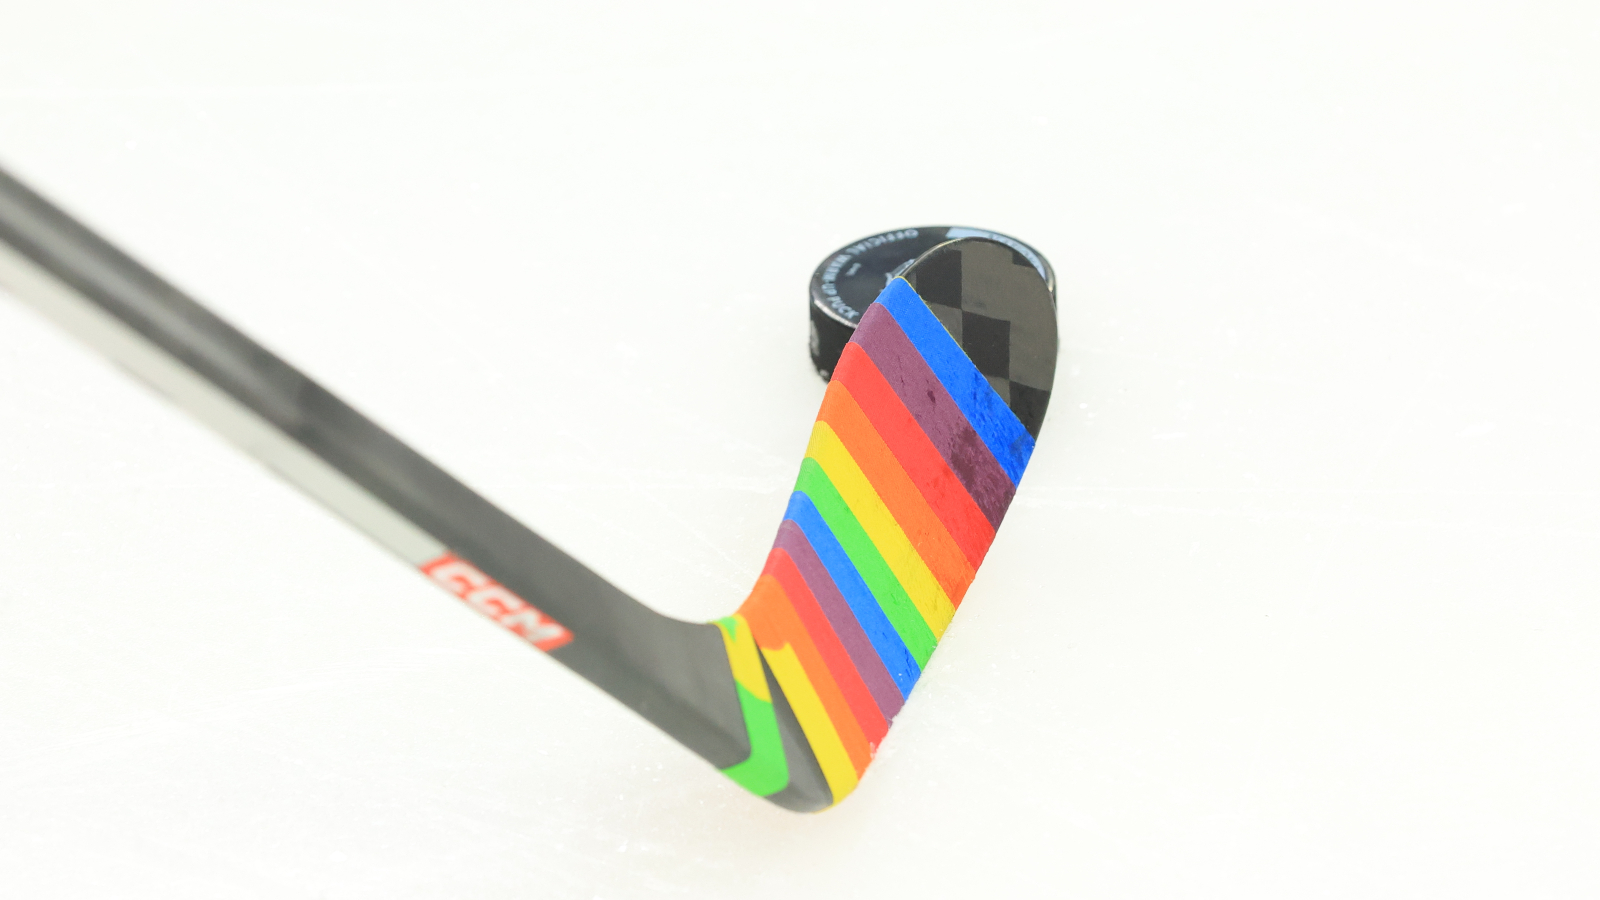 You Can Play, Pride Tape Release Statements Following NHL Pride Tape Ban -  The Hockey News